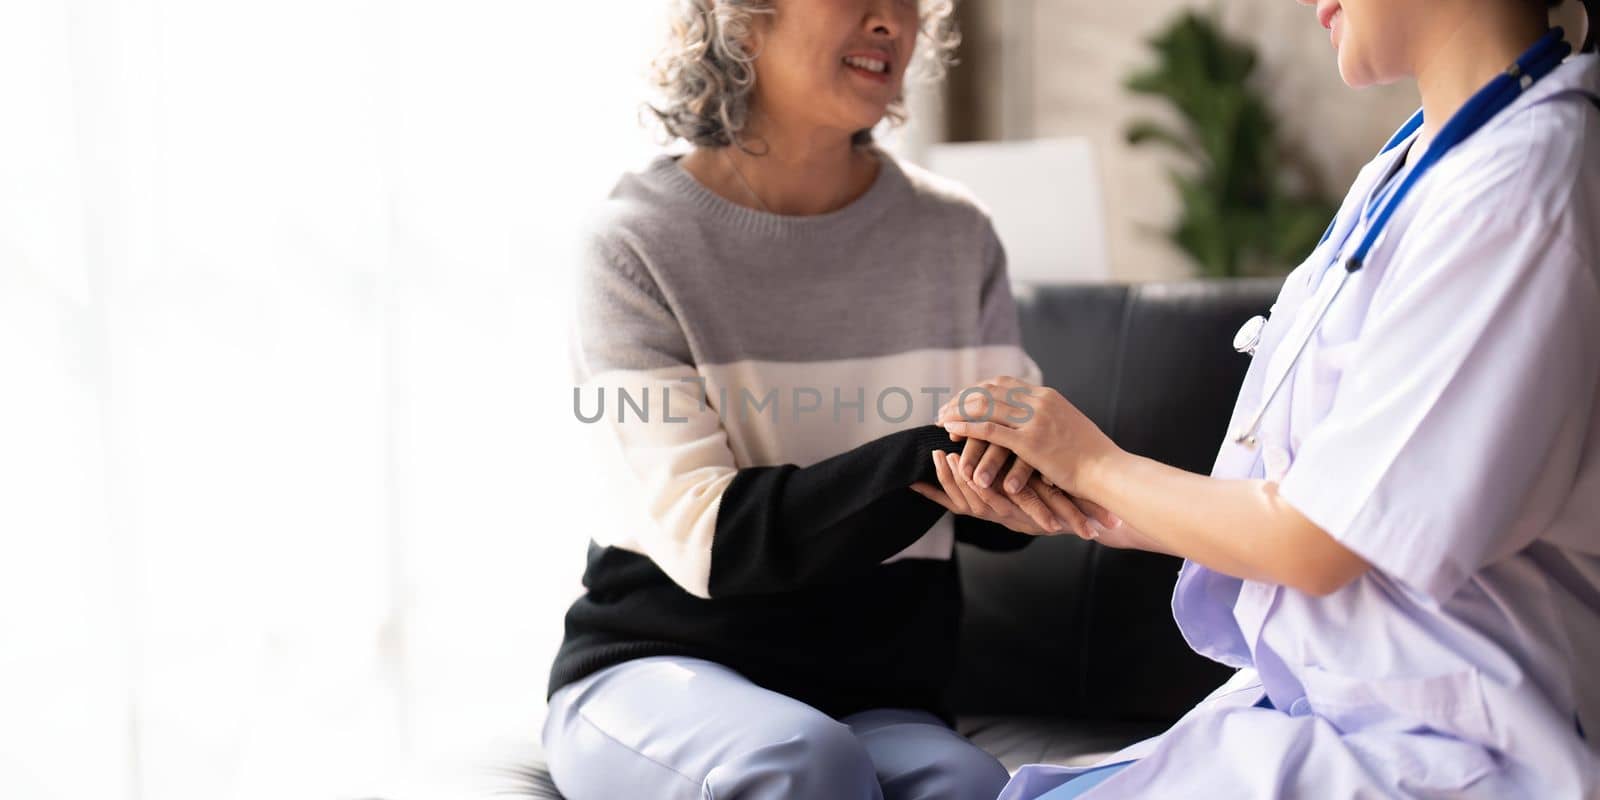 Home caregiver and senior woman holding hands. Professional Elderly Care. Professional care for elderly at nursing homes. Nurse holding hand of senior woman in rest home.